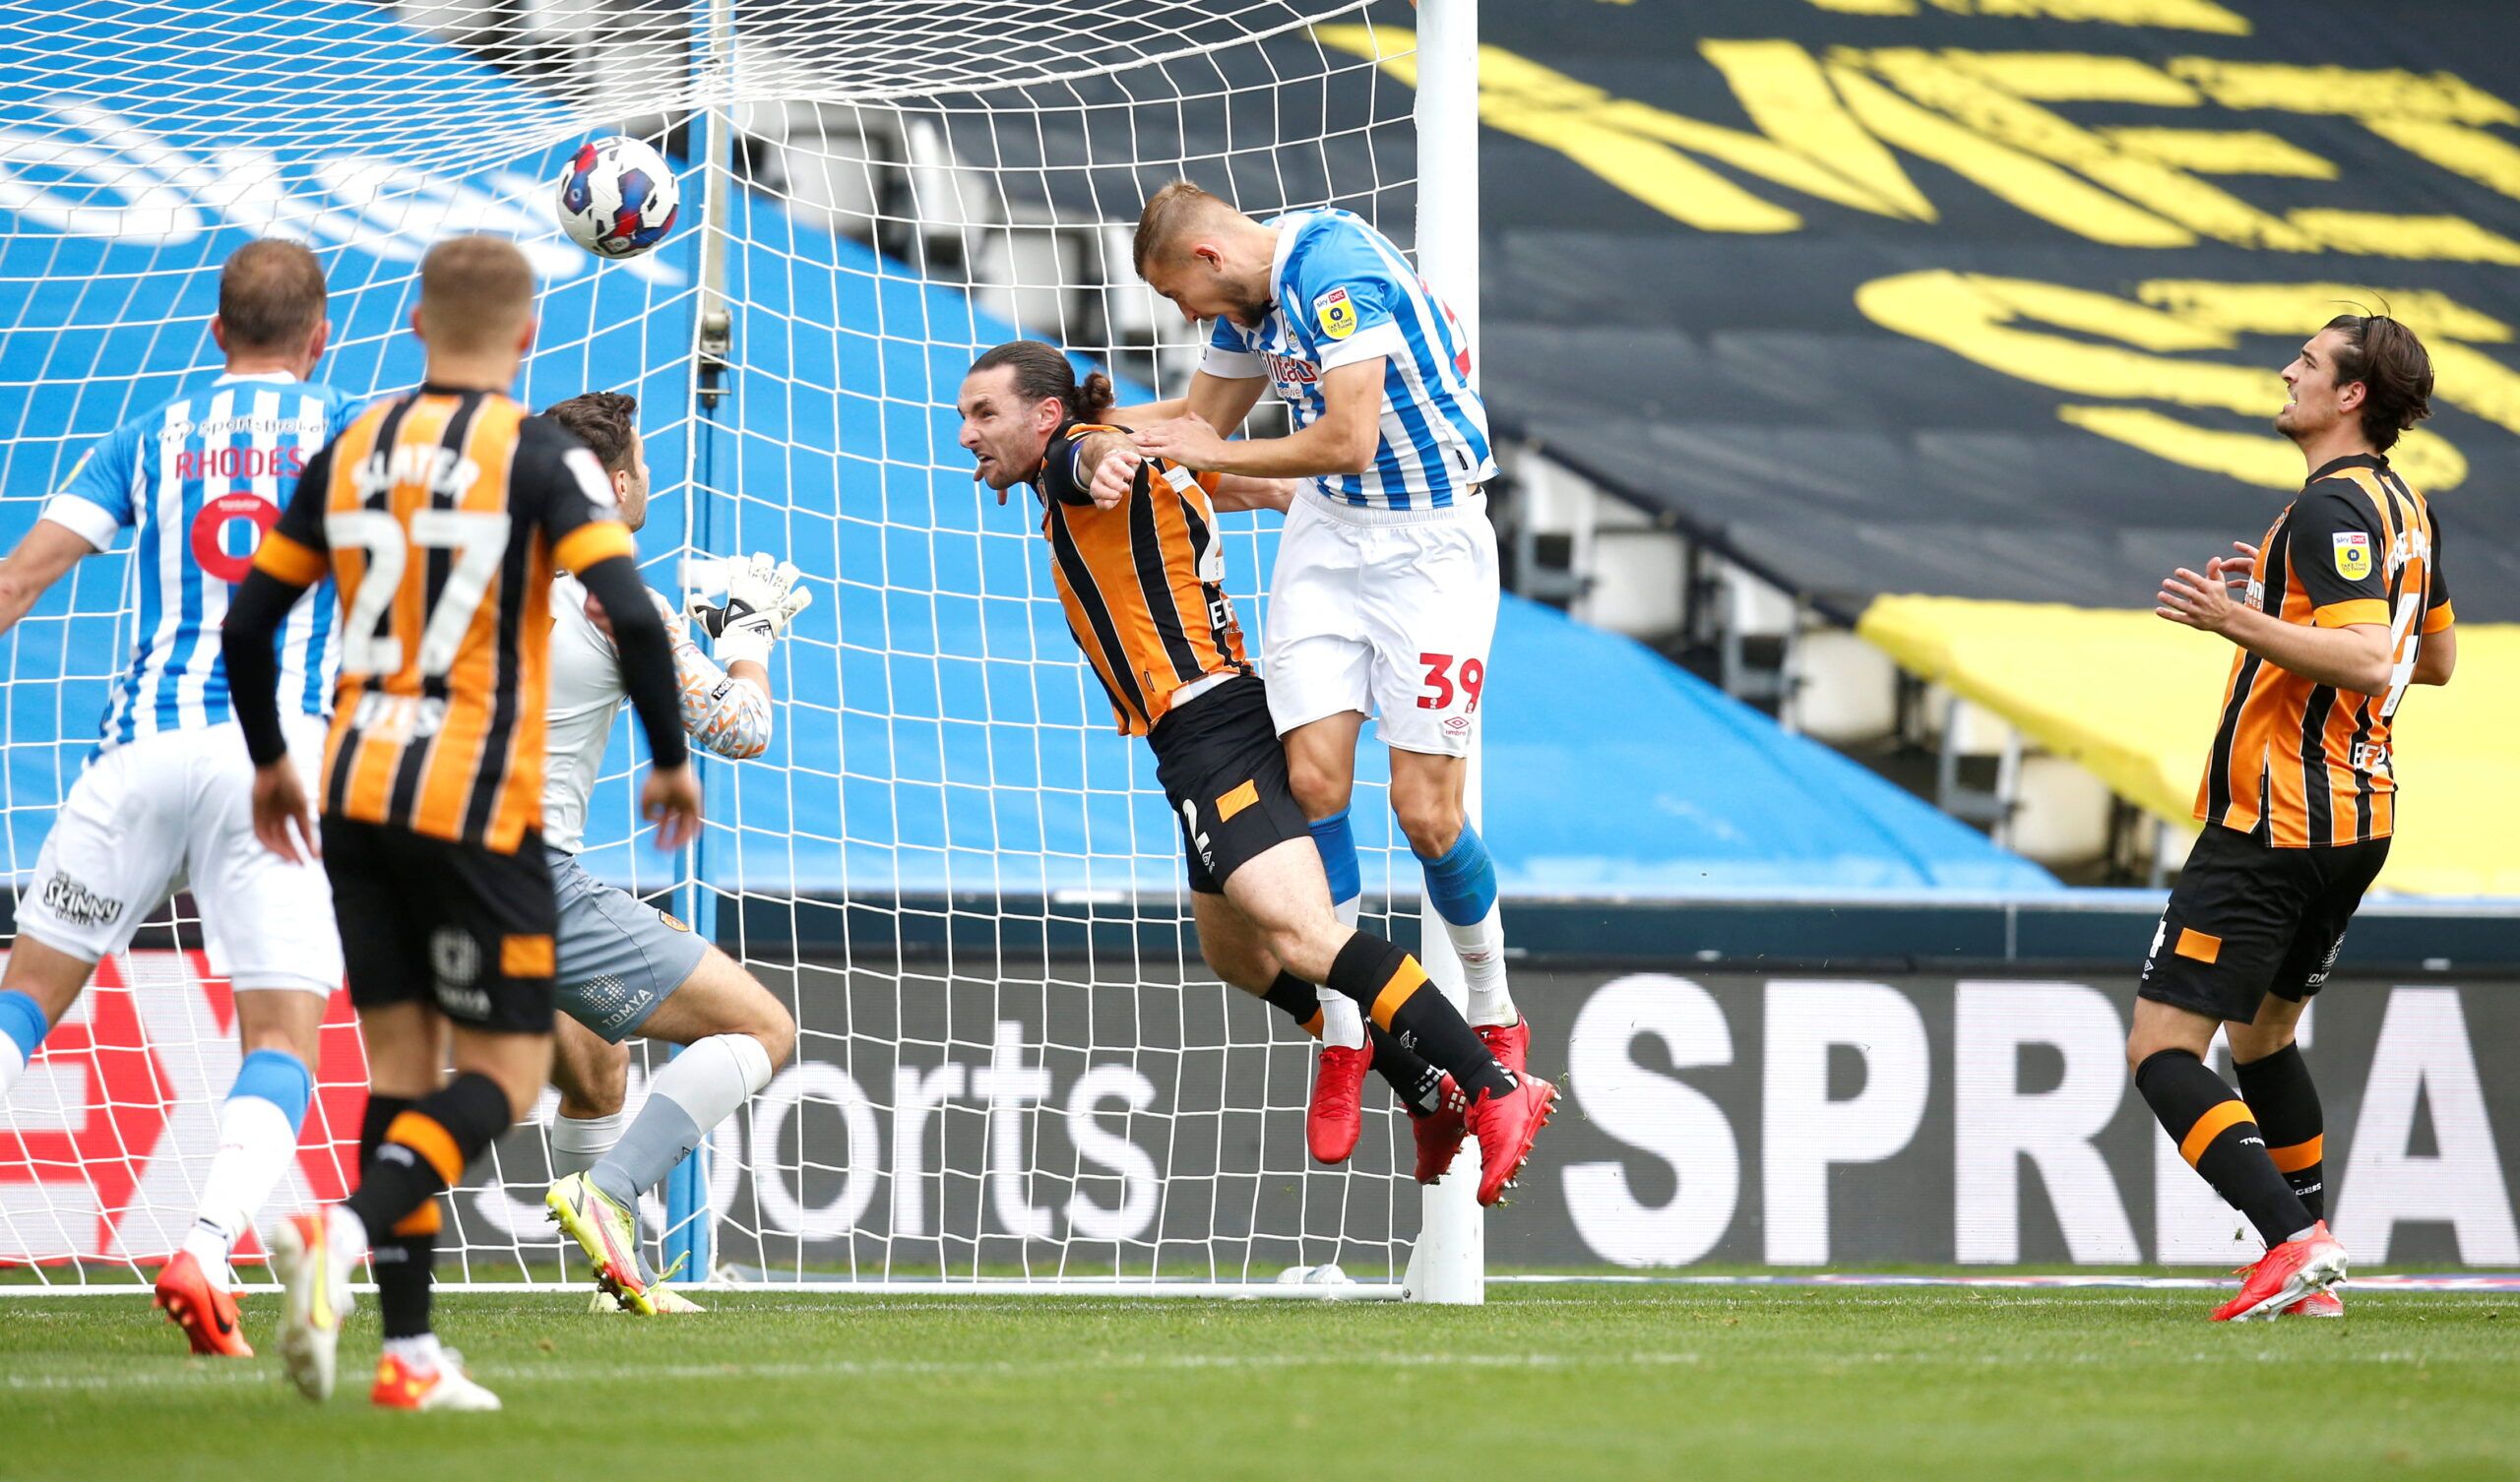 Soccer Football - Championship - Huddersfield Town v Hull City - John Smith's Stadium, Huddersfield, Britain - October 9, 2022 Huddersfield Town's Michal Helik scores their second goal Action Images/Ed Sykes  EDITORIAL USE ONLY. No use with unauthorized audio, video, data, fixture lists, club/league logos or 